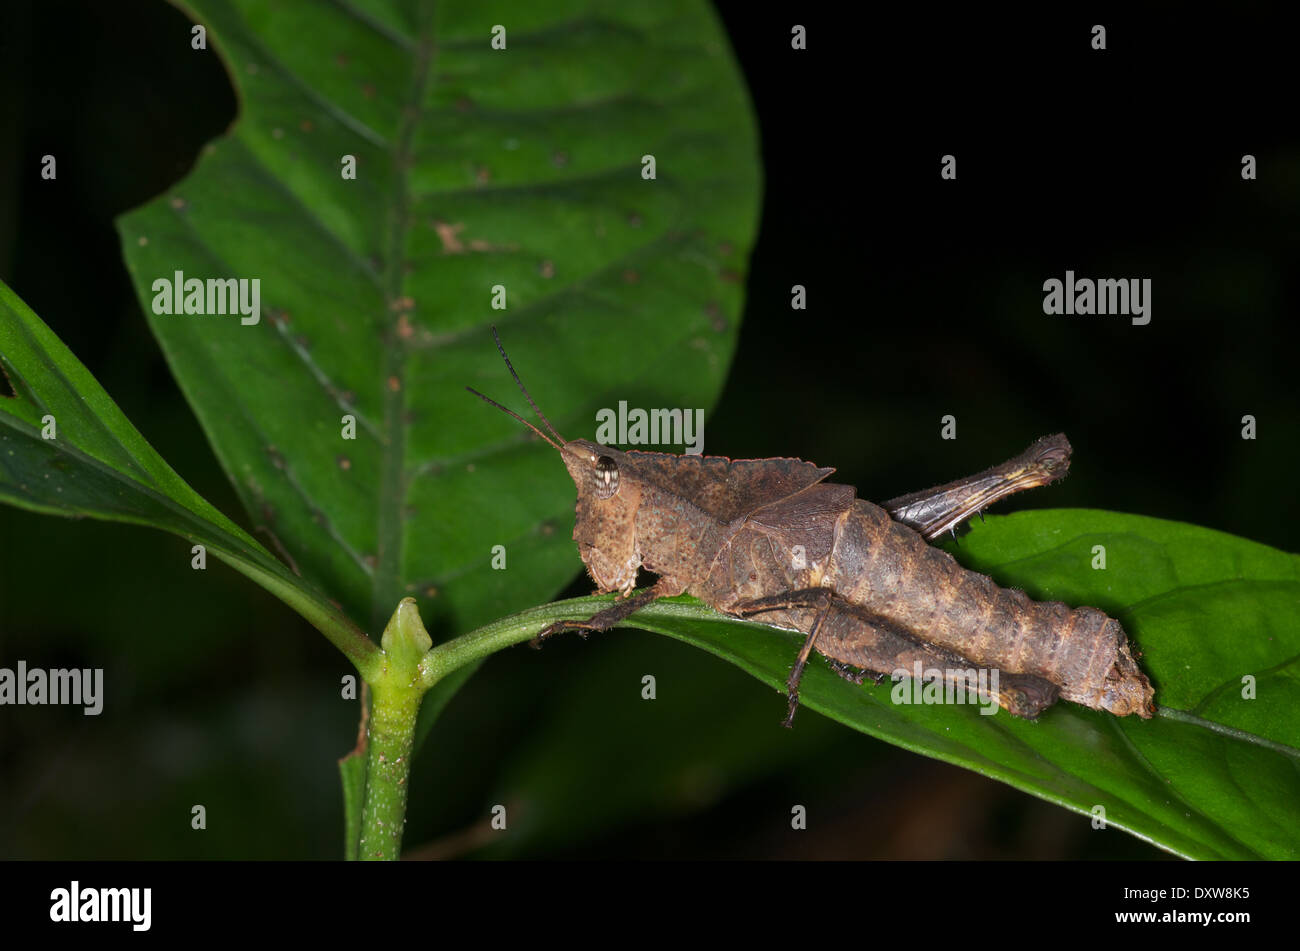 A leaf-mimic short-horned grasshopper (family Romaleidae) on a leaf at night in the Amazon basin in Peru. Stock Photo